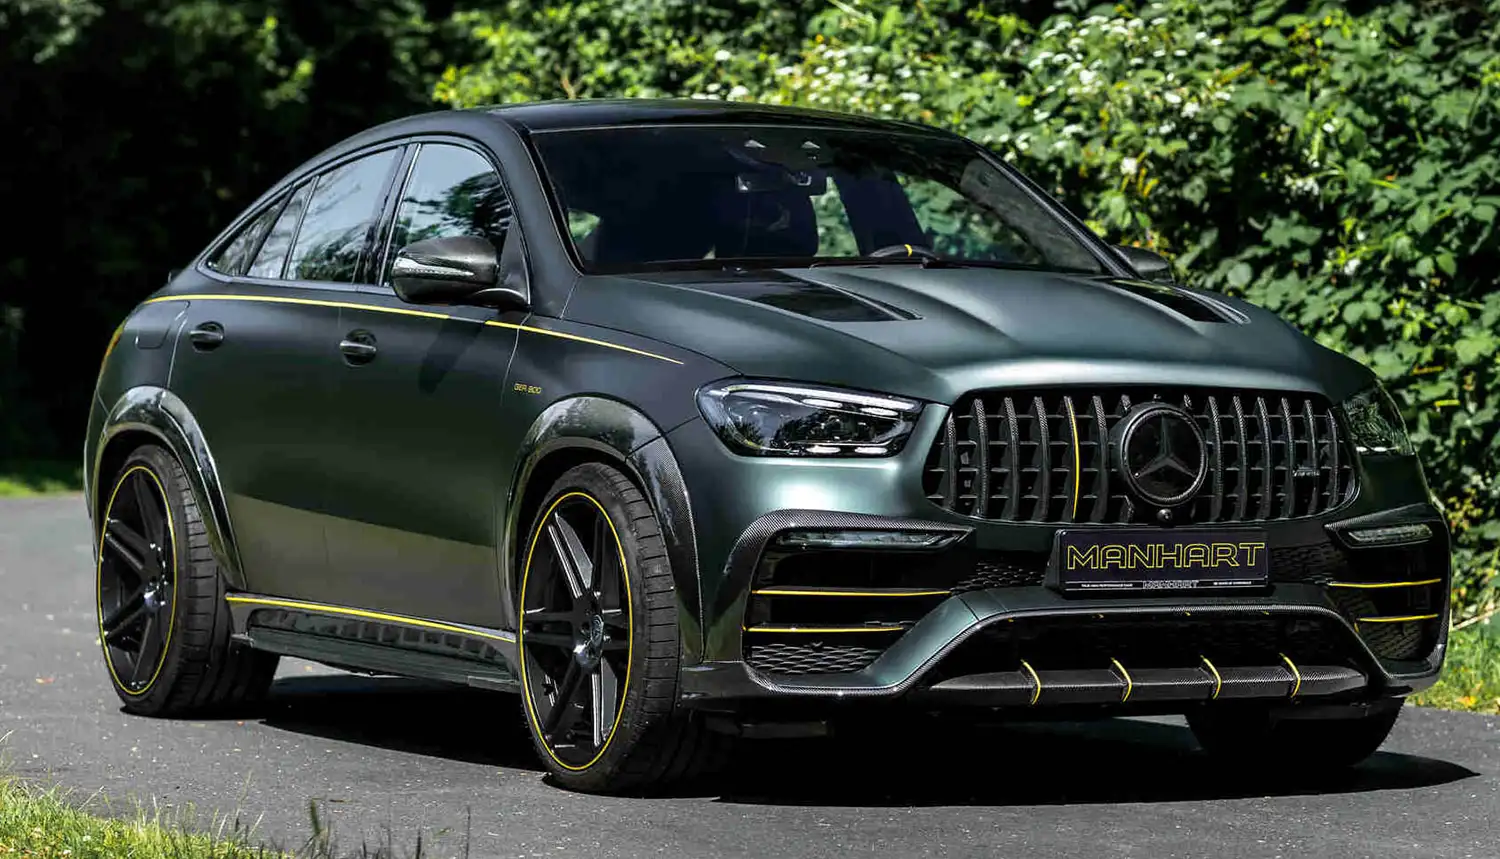 MANHART GER 800: Supercharged Mercedes-AMG GLE Coupe